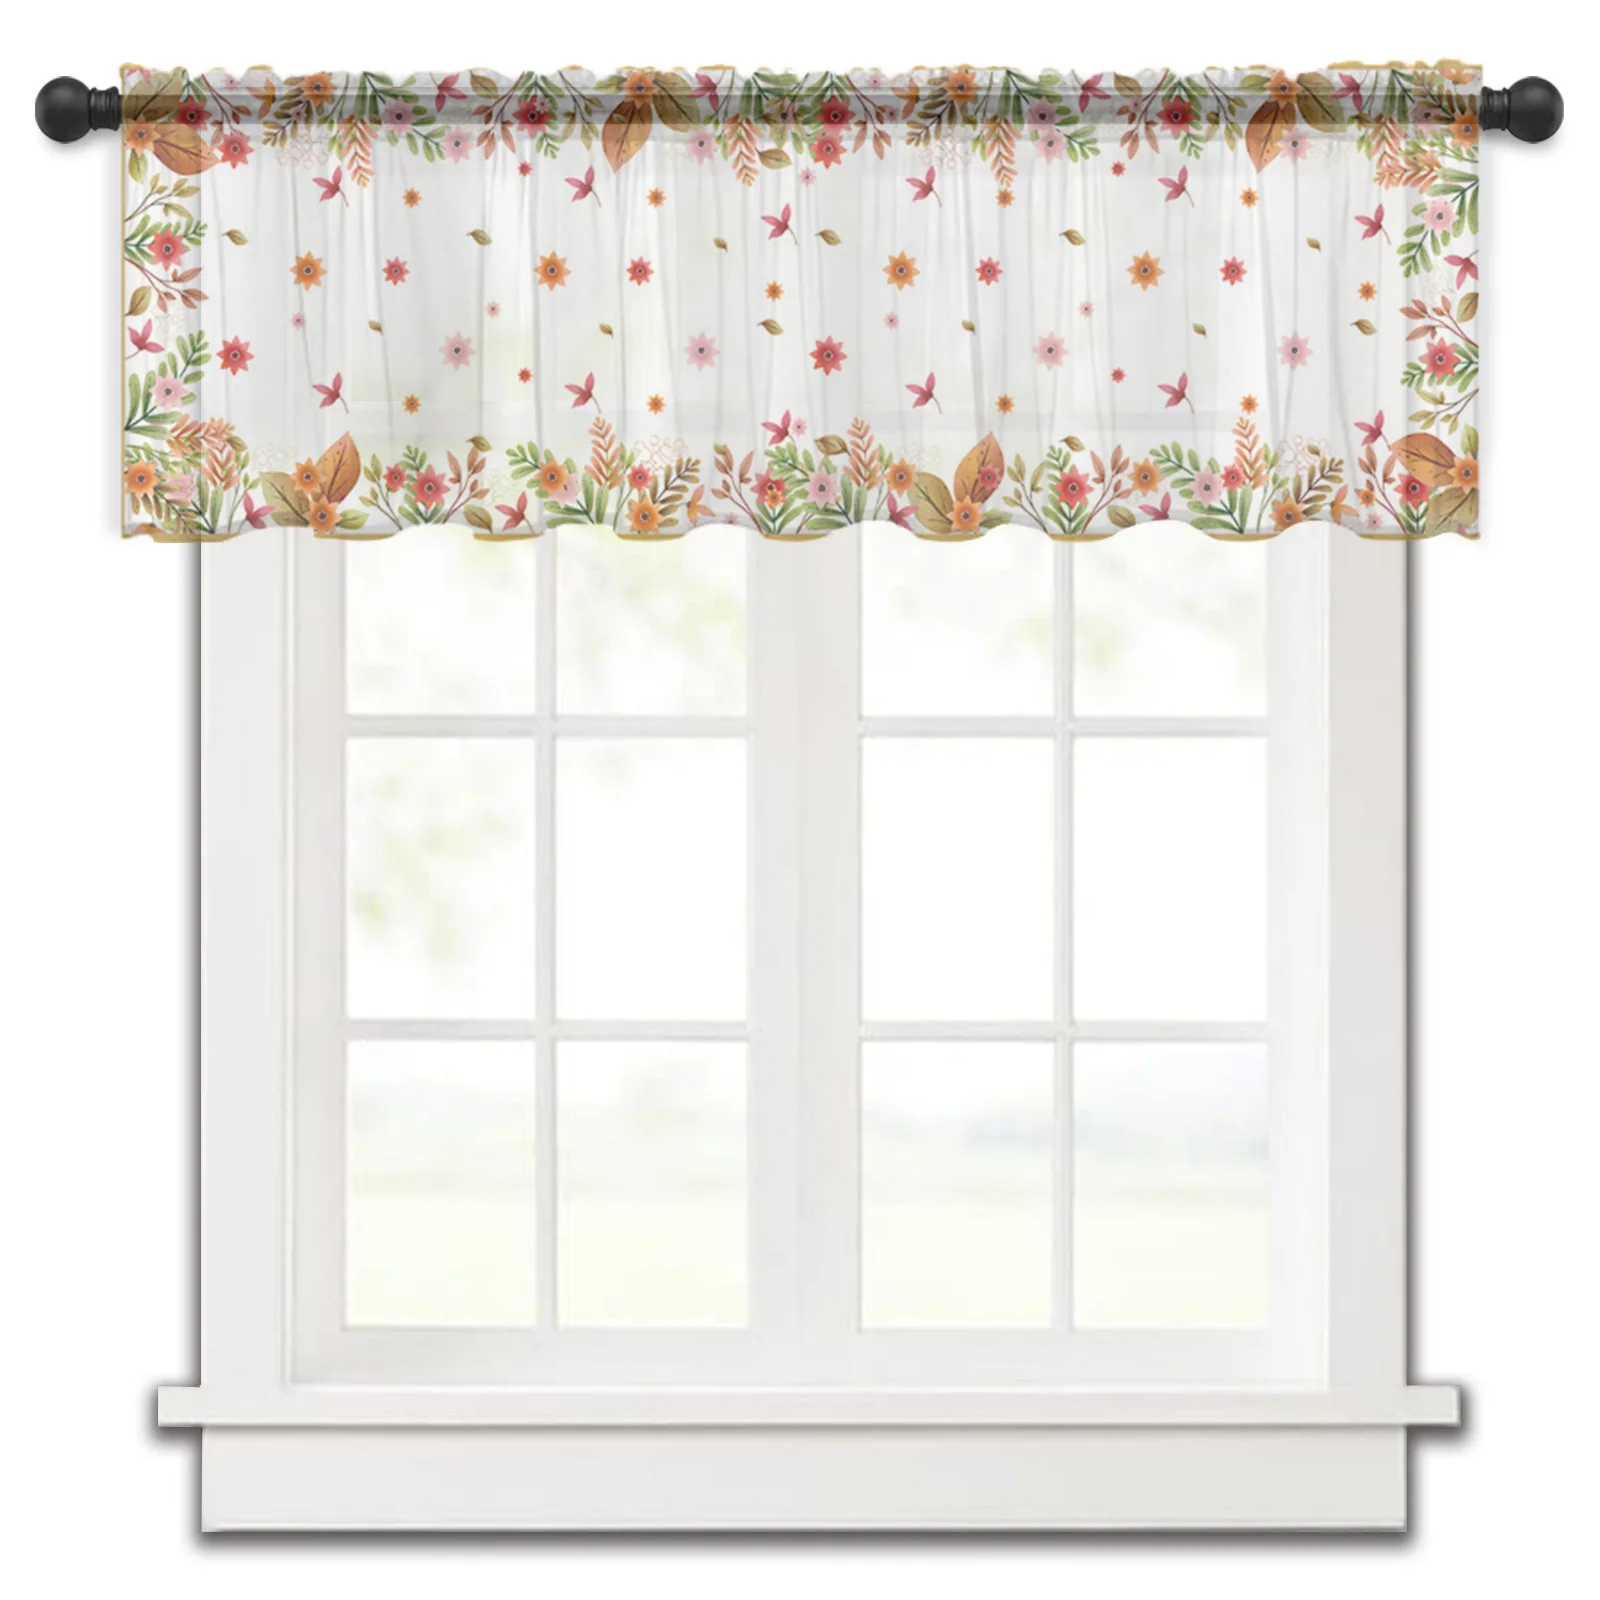 

Leaves Summer Autumn Tulle Kitchen Small Window Curtain Valance Sheer Short Curtain Bedroom Living Room Home Decor Voile Drapes